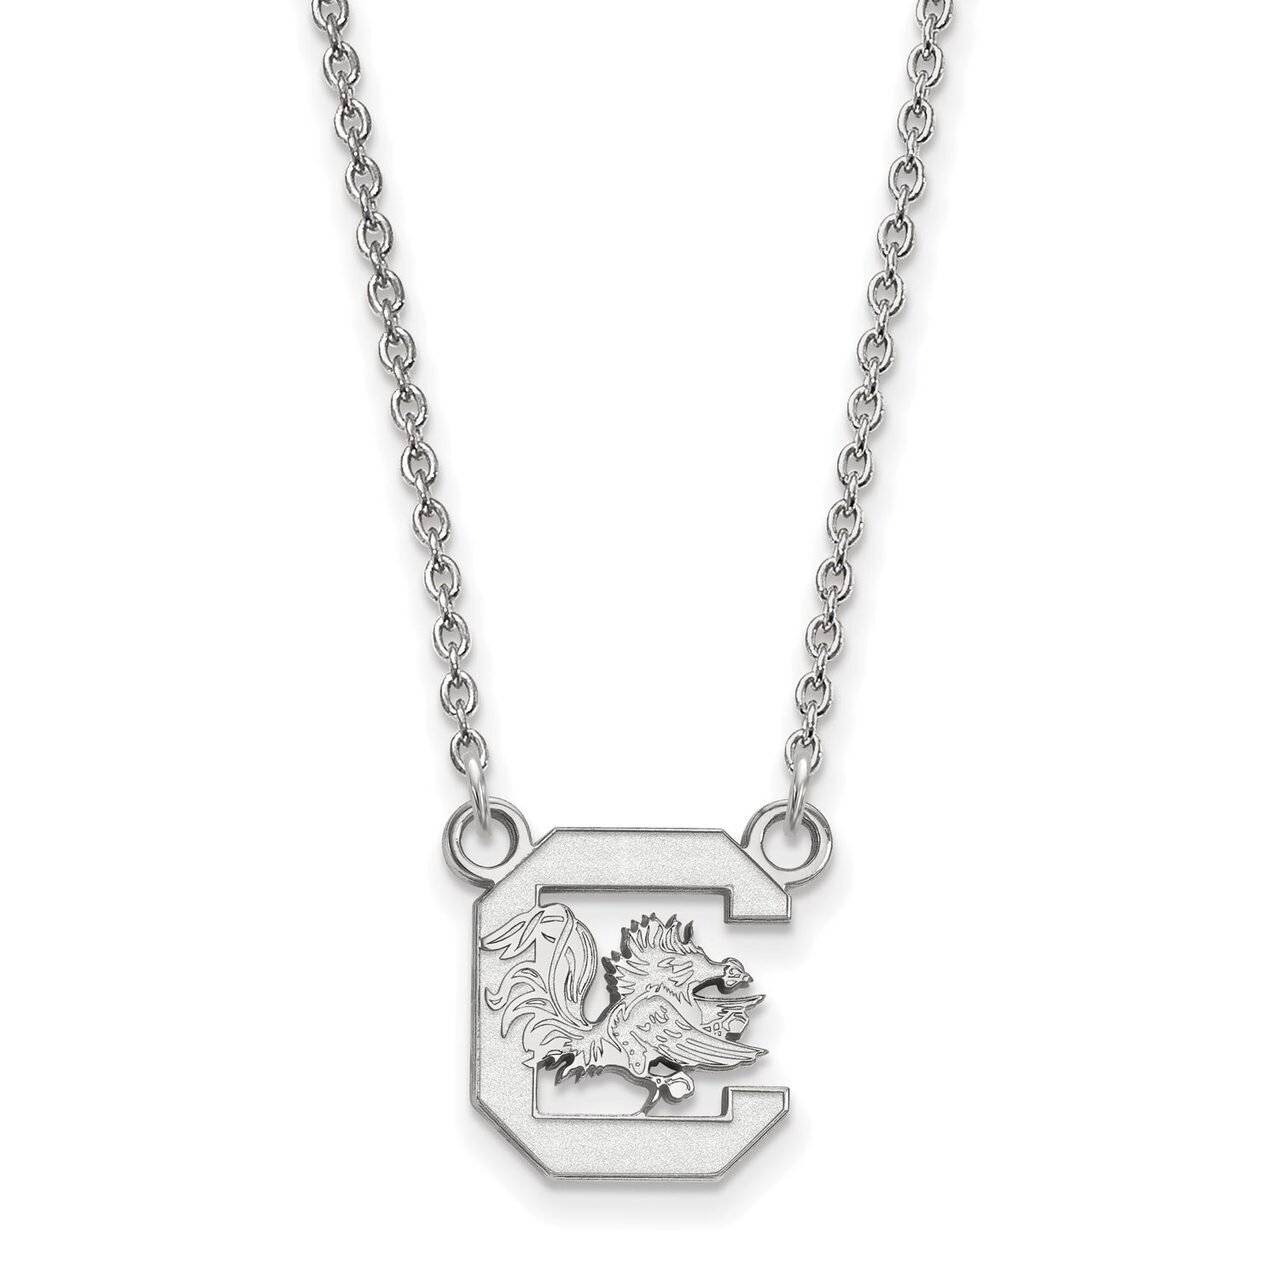 University of South Carolina Small Pendant with Chain Necklace 10k White Gold 1W015USO-18